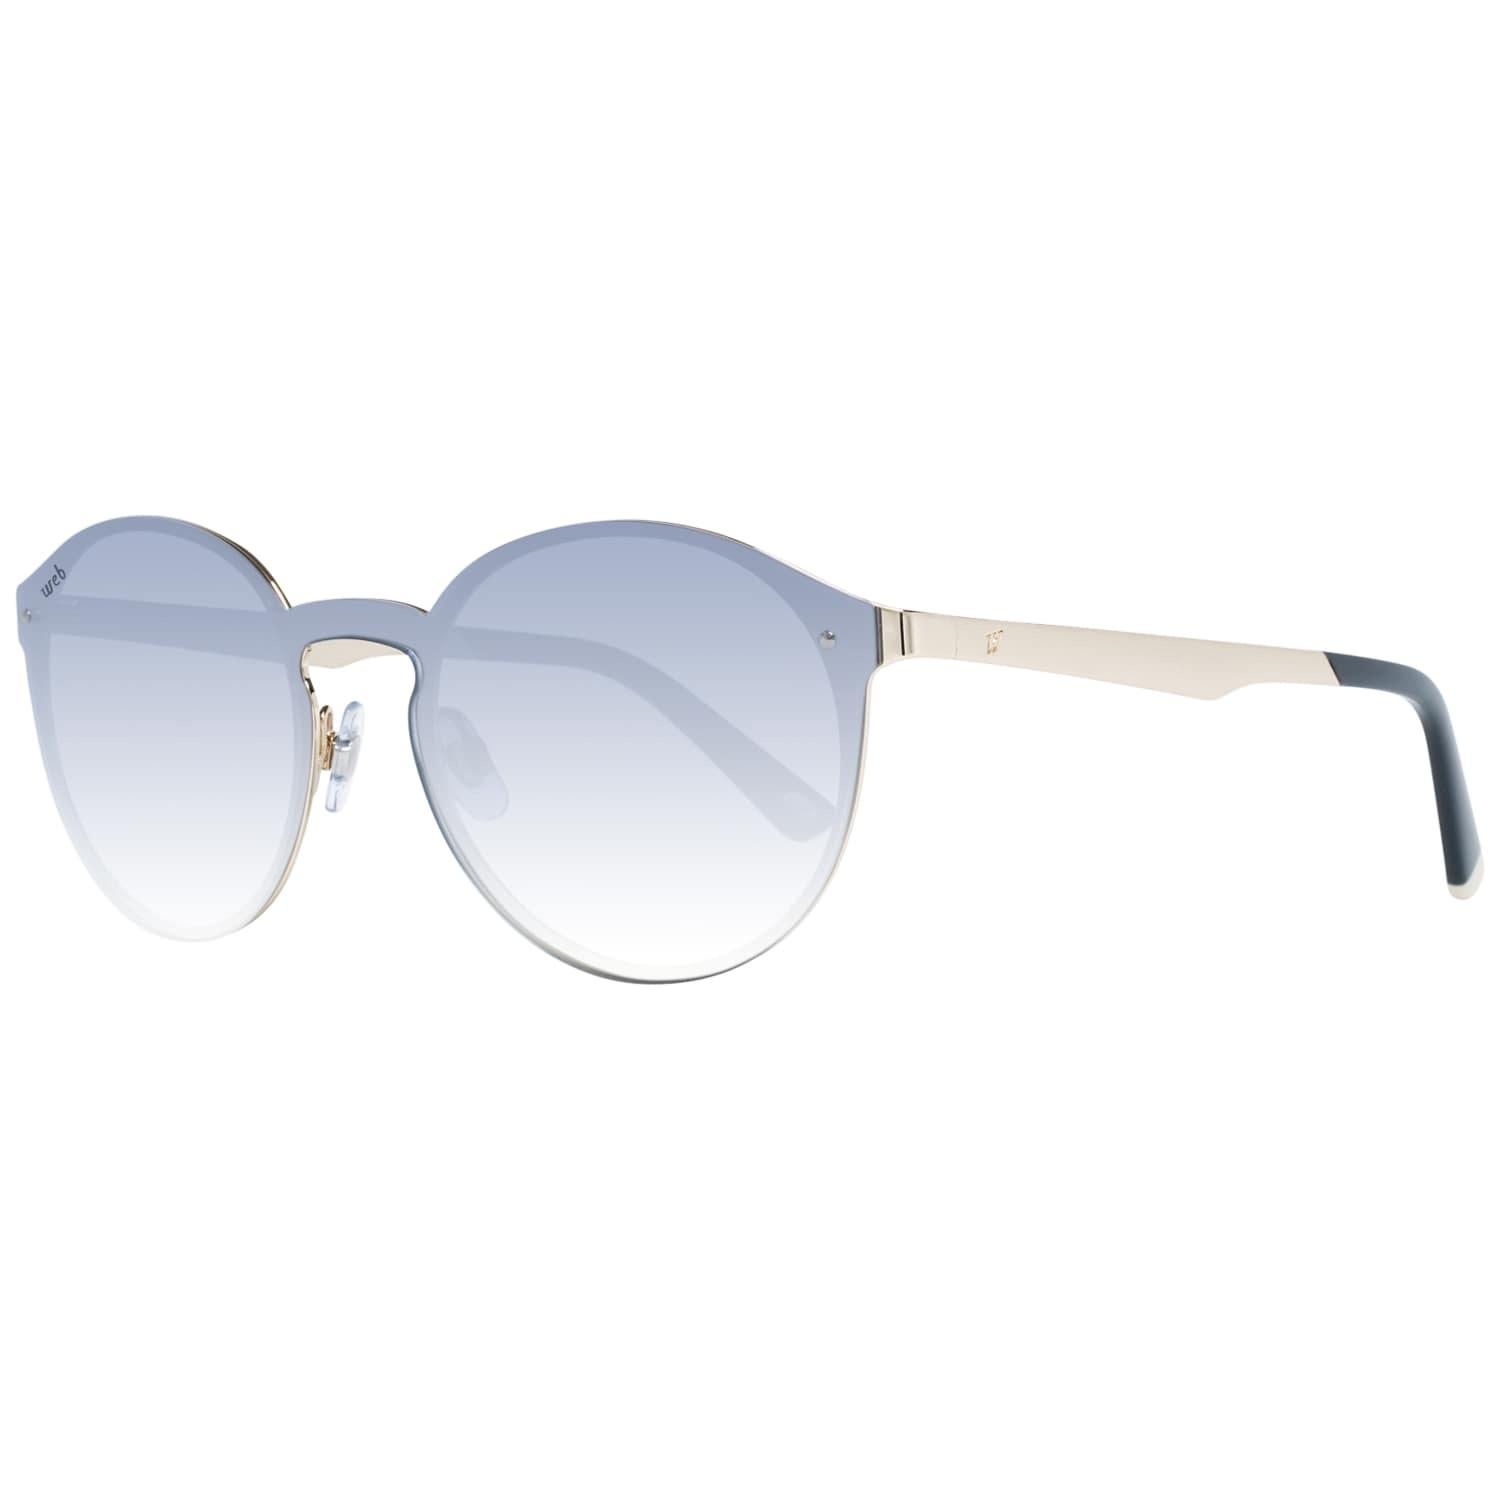 Details
MATERIAL: Metal
COLOR: Rose Gold
MODEL: WE0203 0028X
GENDER: Adult Unisex
COUNTRY OF MANUFACTURE: China
TYPE: Sunglasses
ORIGINAL CASE?: Yes
STYLE: Mono Lens
OCCASION: Casual
FEATURES: Lightweight
LENS COLOR: Grey
LENS TECHNOLOGY: